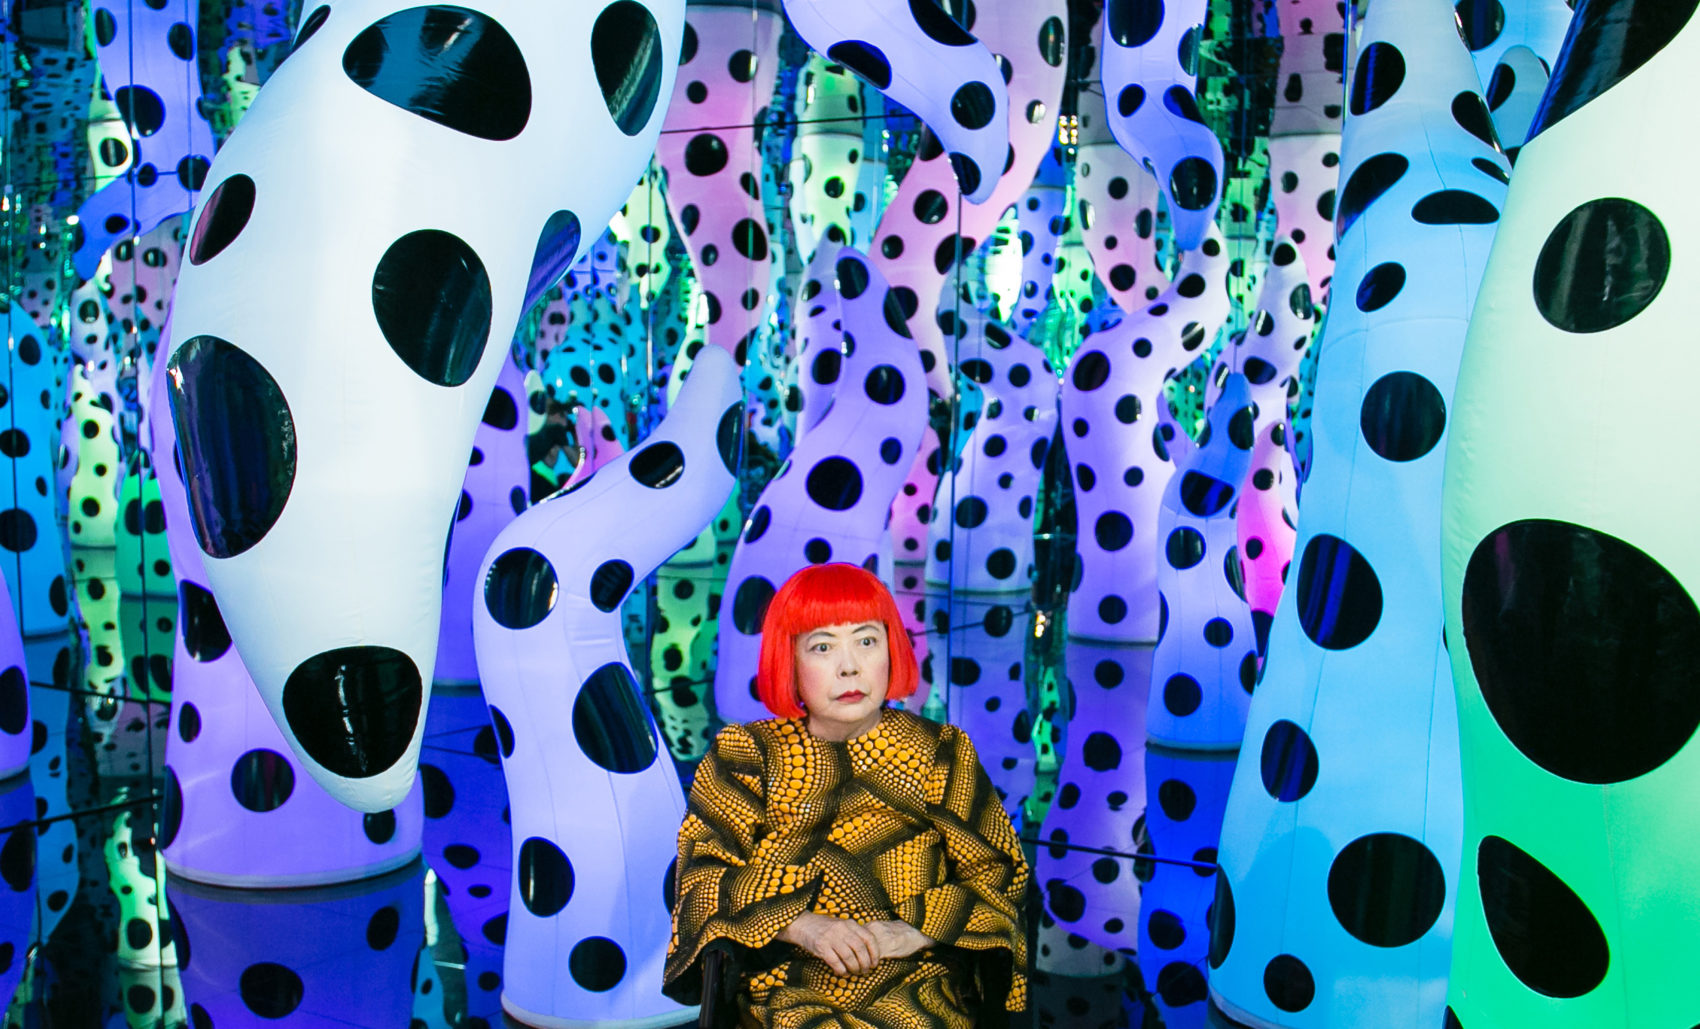 Japanese artist Yayoi Kusama in her 2013 solo exhibition “I Who Have Arrived in Heaven”